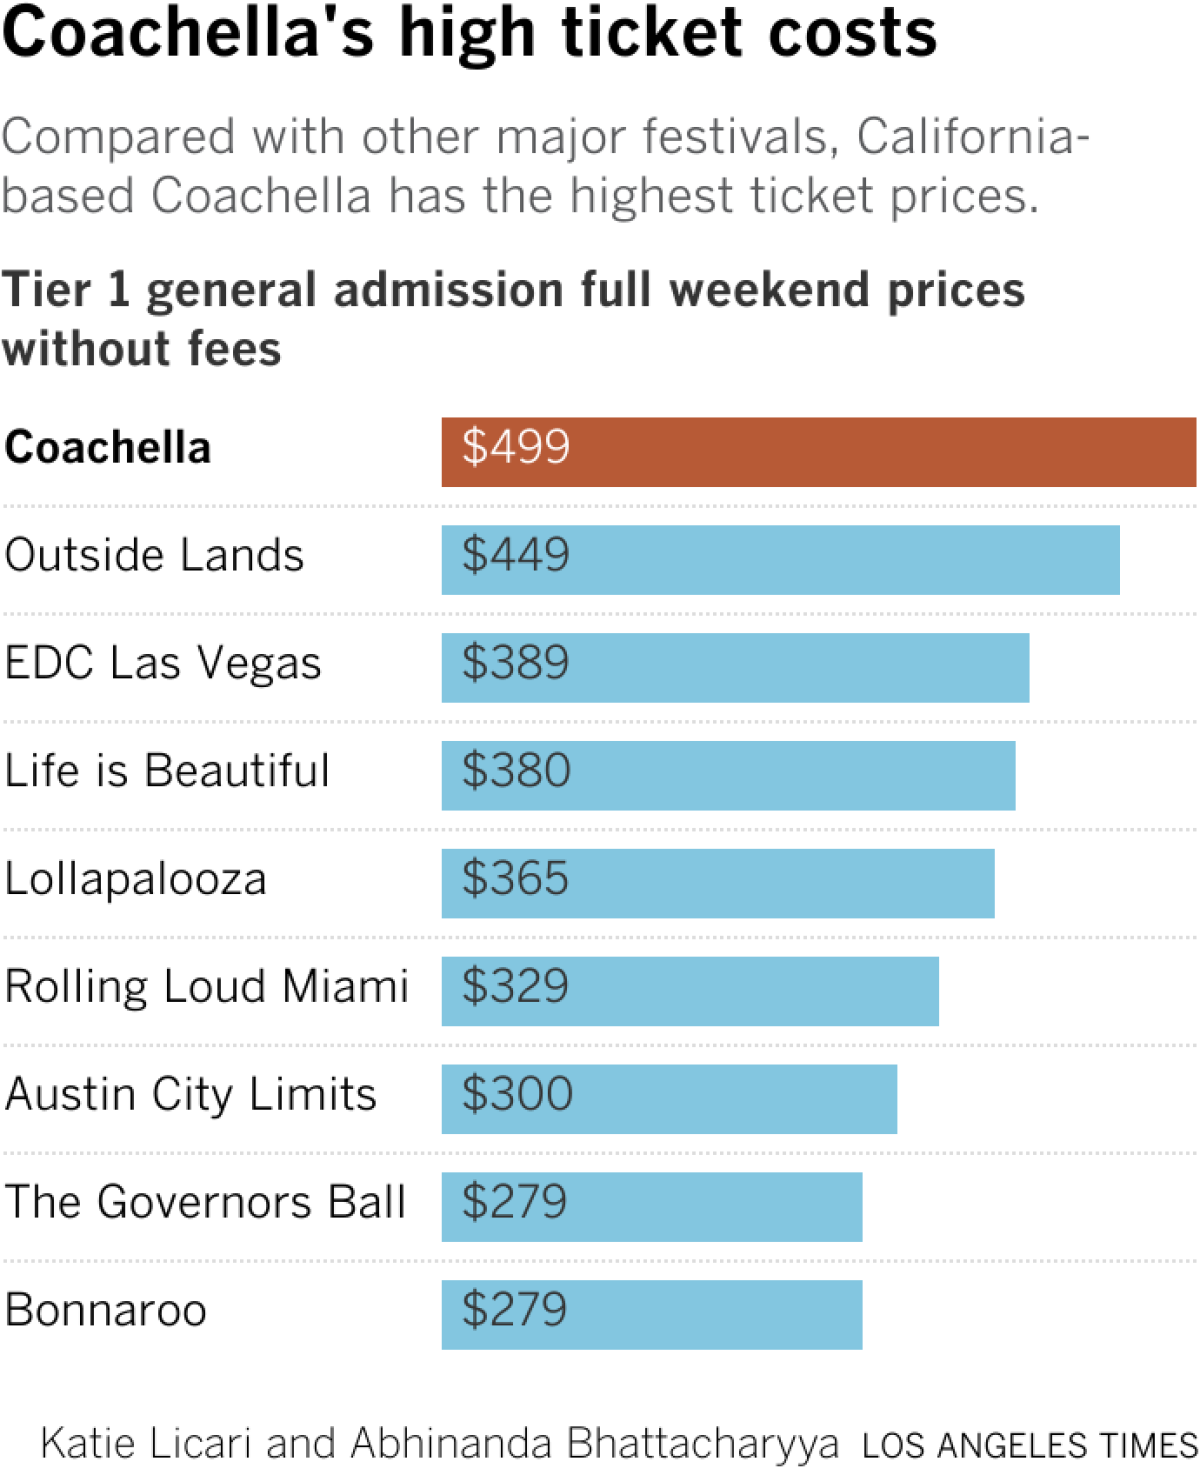 This is a bar chart comparing festival prices for popular festivals in the United States. Of the festivals reviewed for this story, California-based Coachella has the highest ticket prices at $499. Bonnaroo has the lowest price at $279.